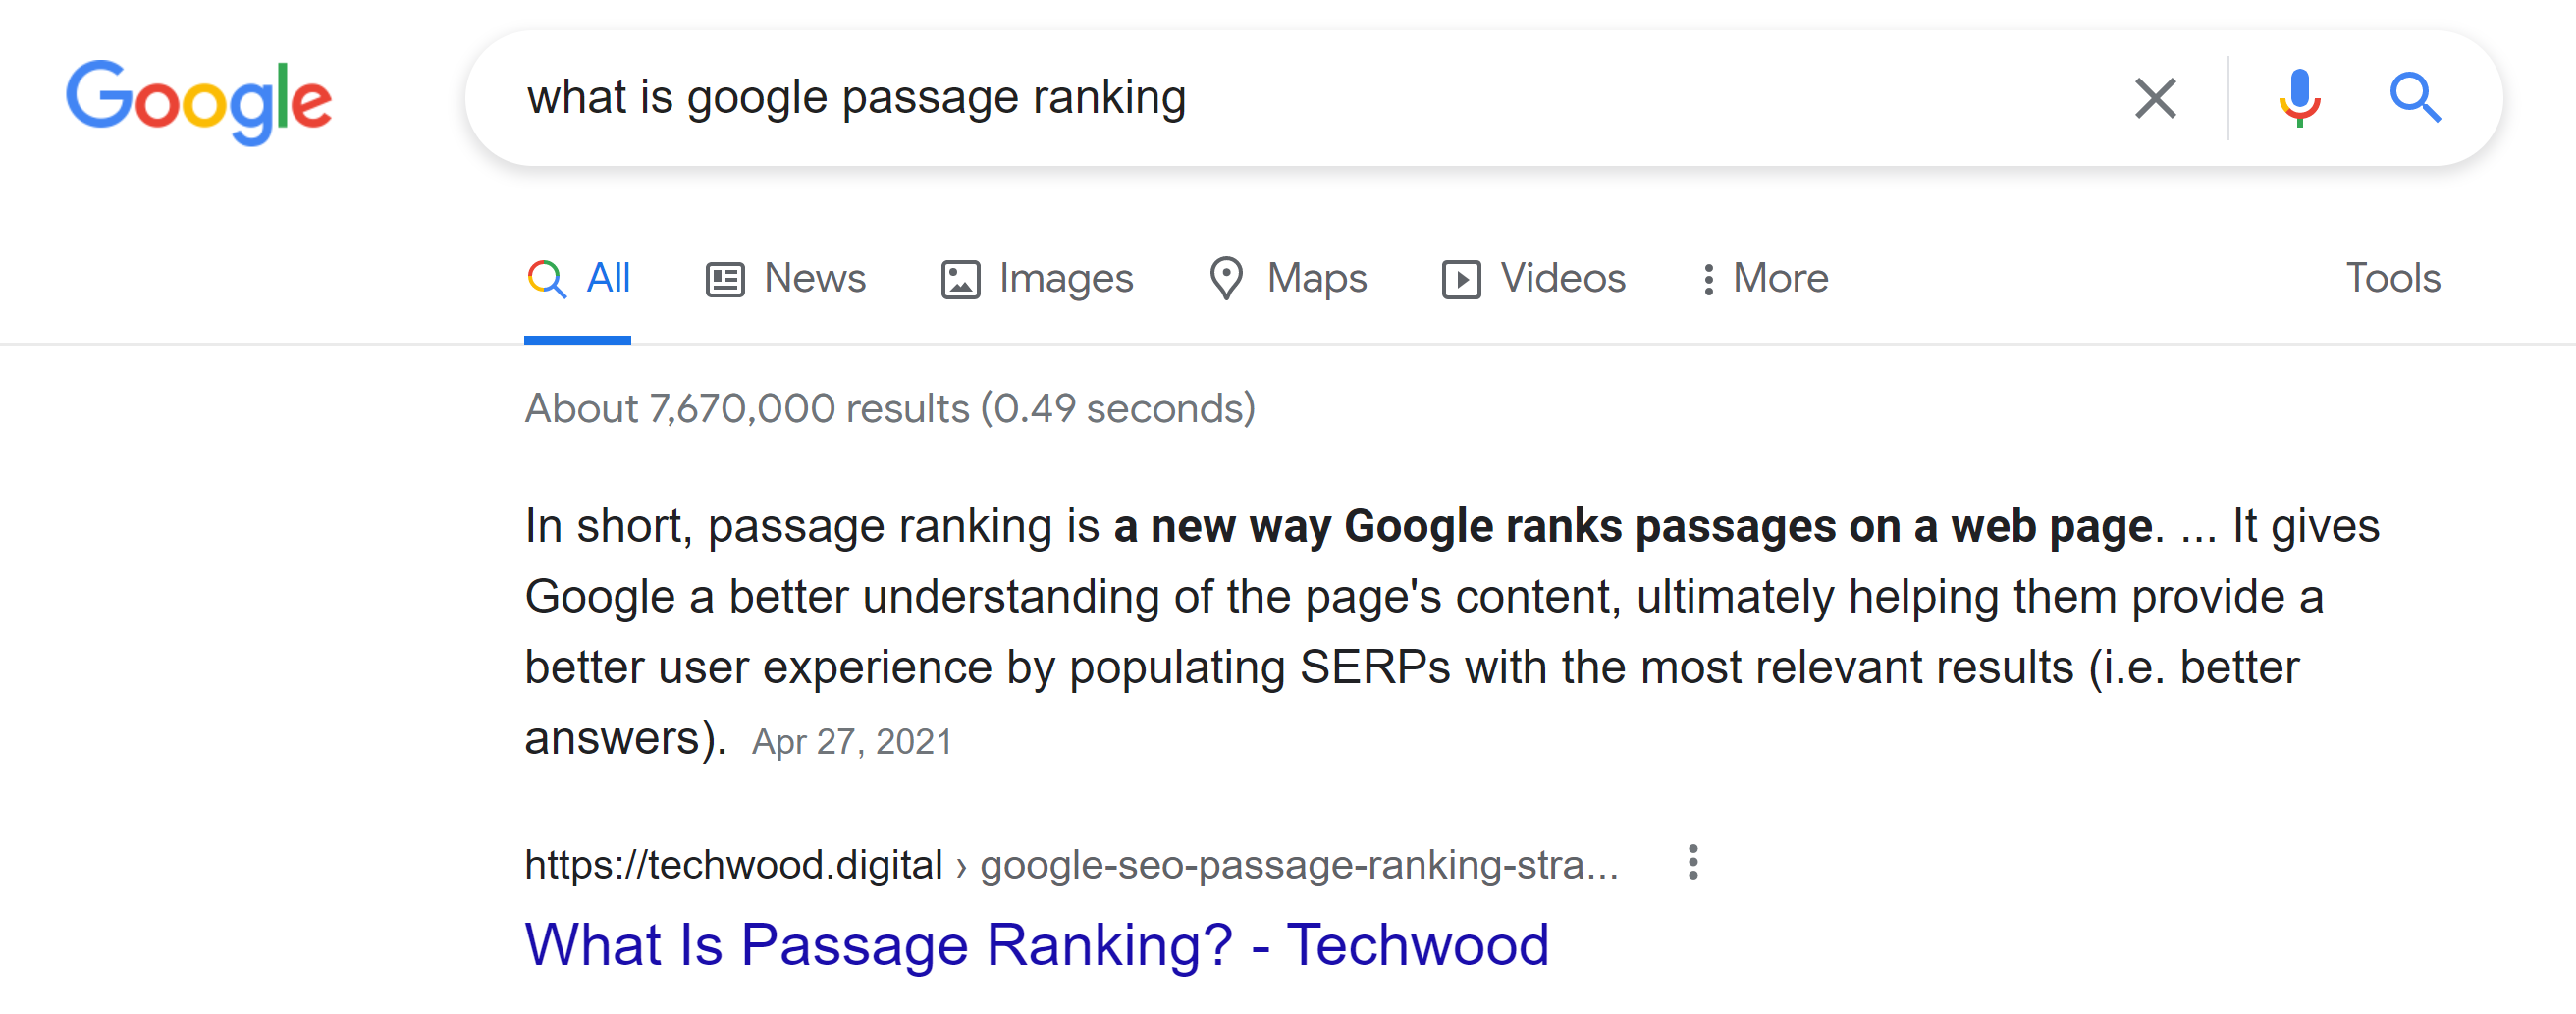 Featured Snippet: 'What is Google Passage Ranking?'